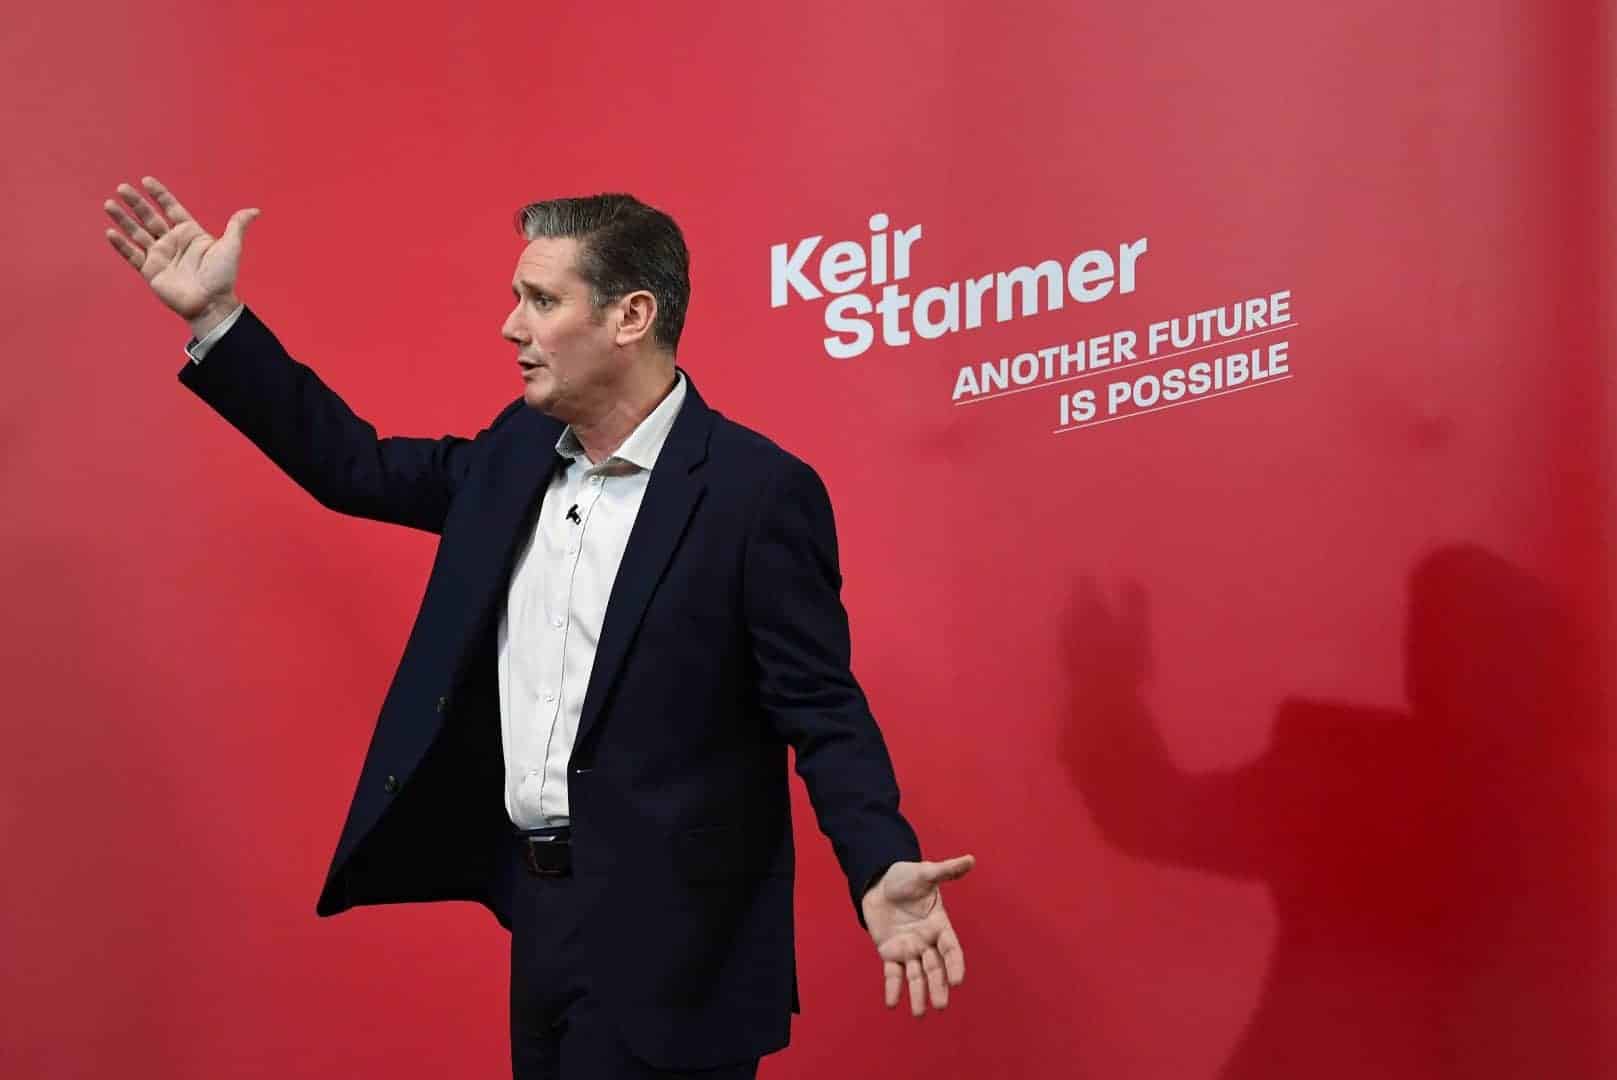 ‘We welcome migrants, we don’t scapegoat them’ Keir Starmer makes freedom of movement pledge